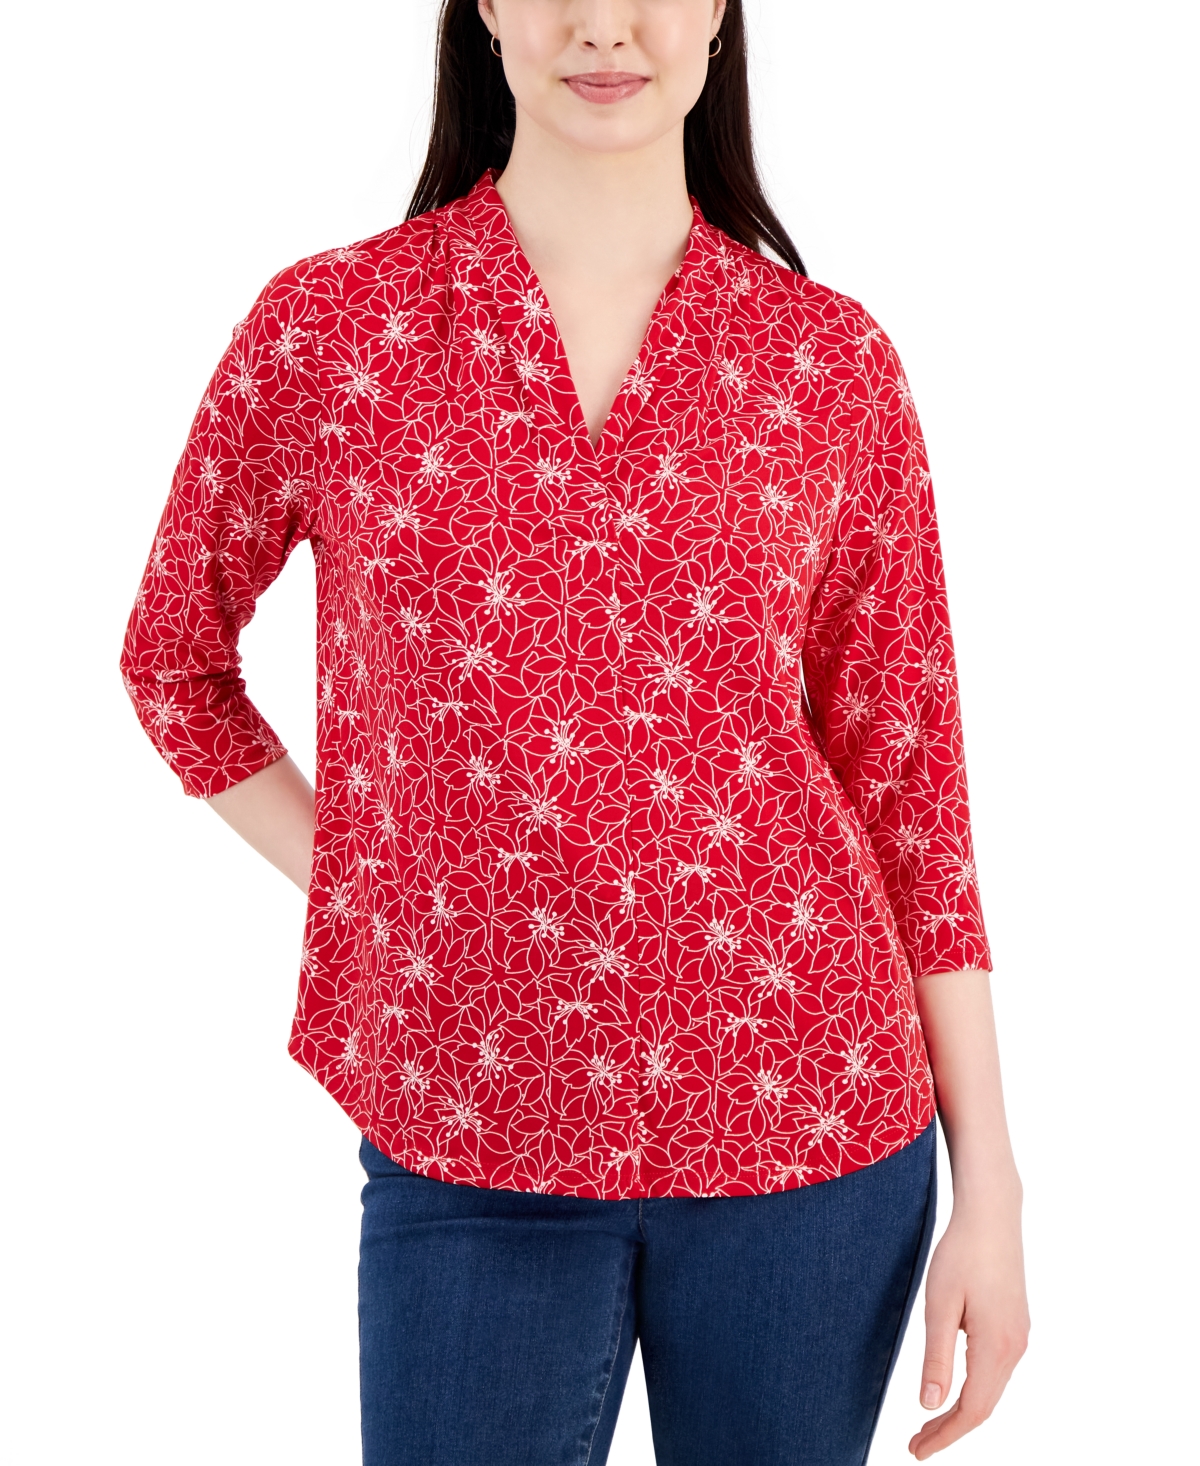 Women's Printed Pleated V-Neck Knit Top, Created for Macy's - Ravishing Red Combo